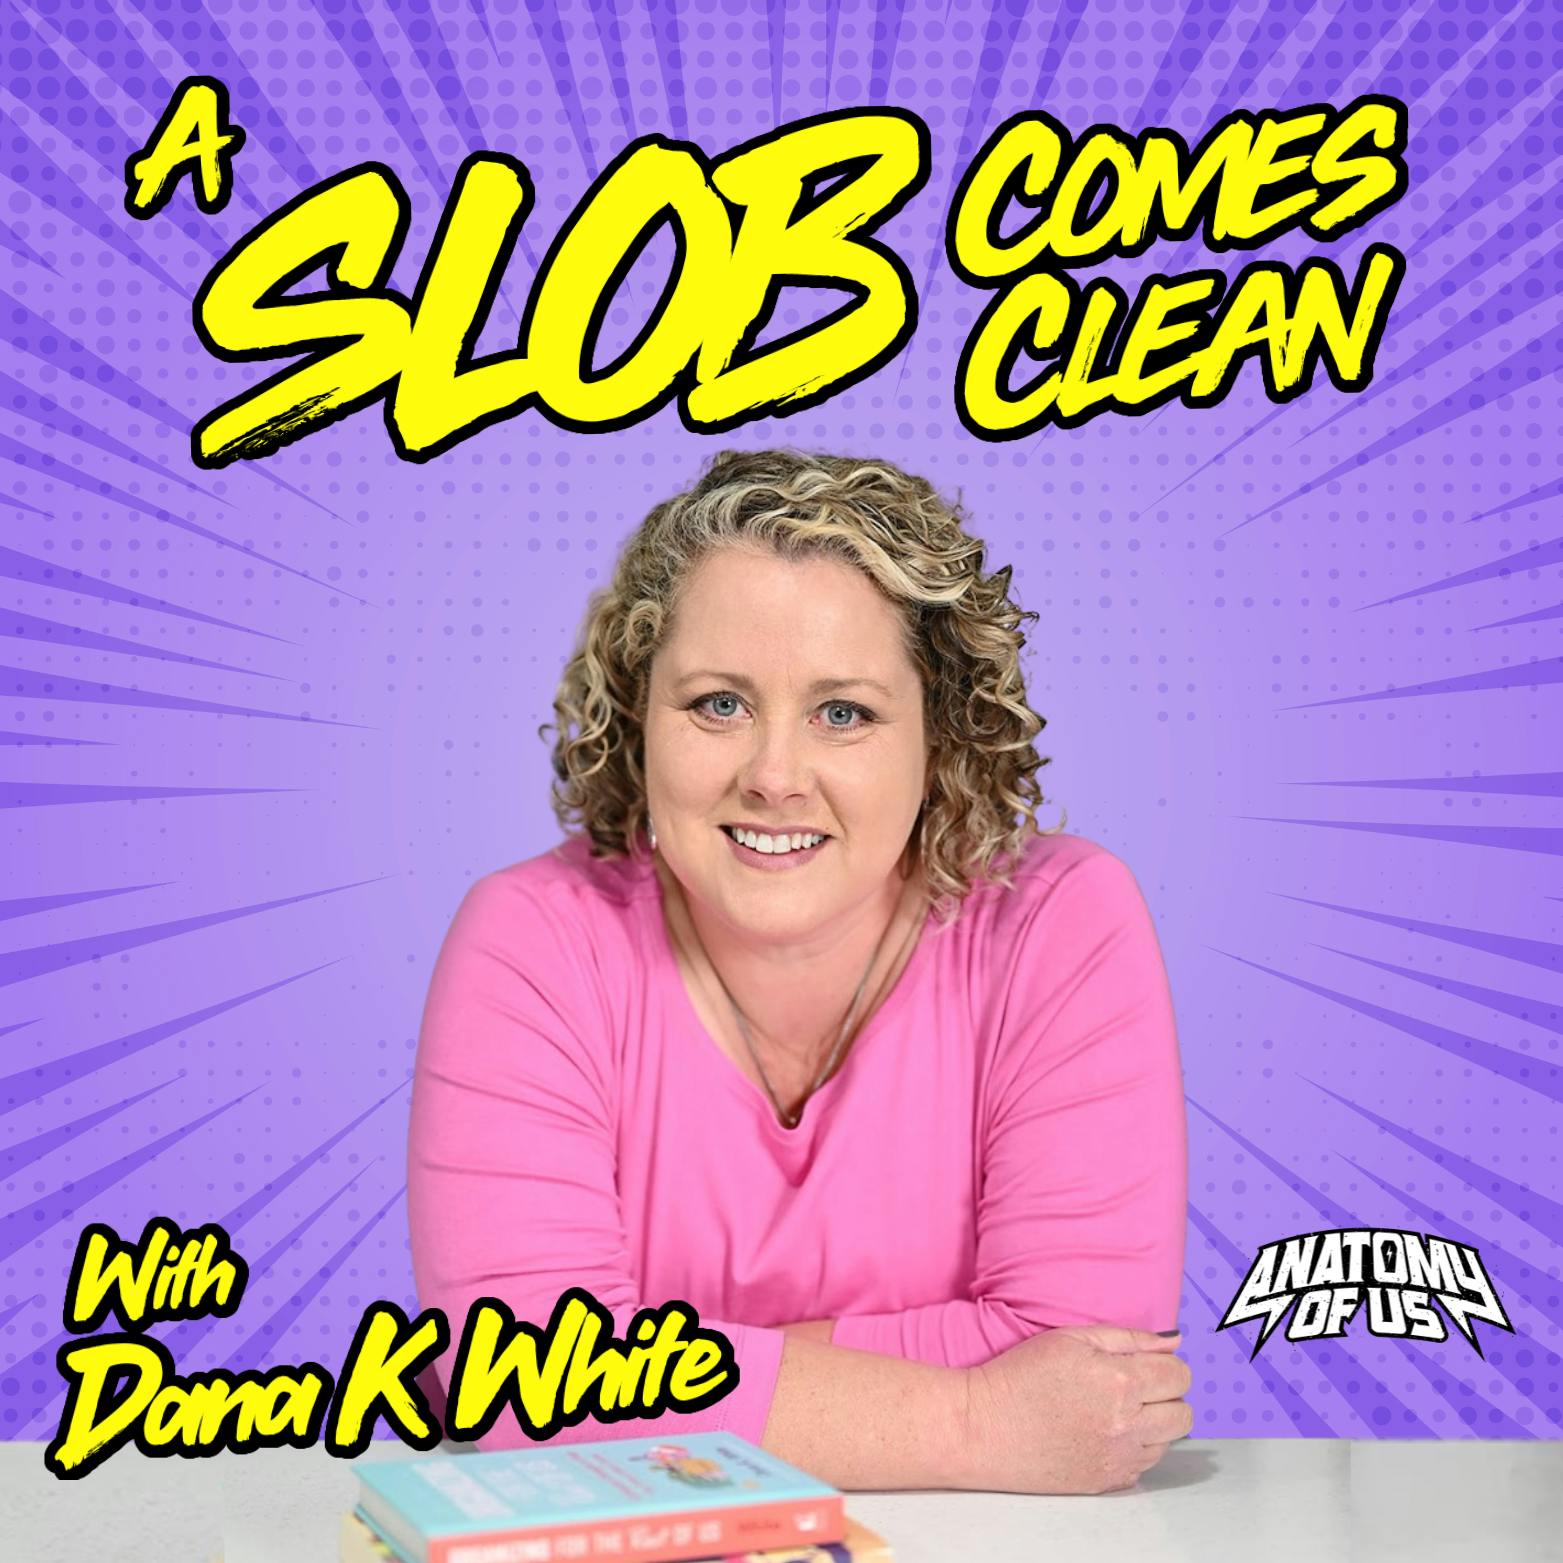 A Slob Comes Clean with Dana K White